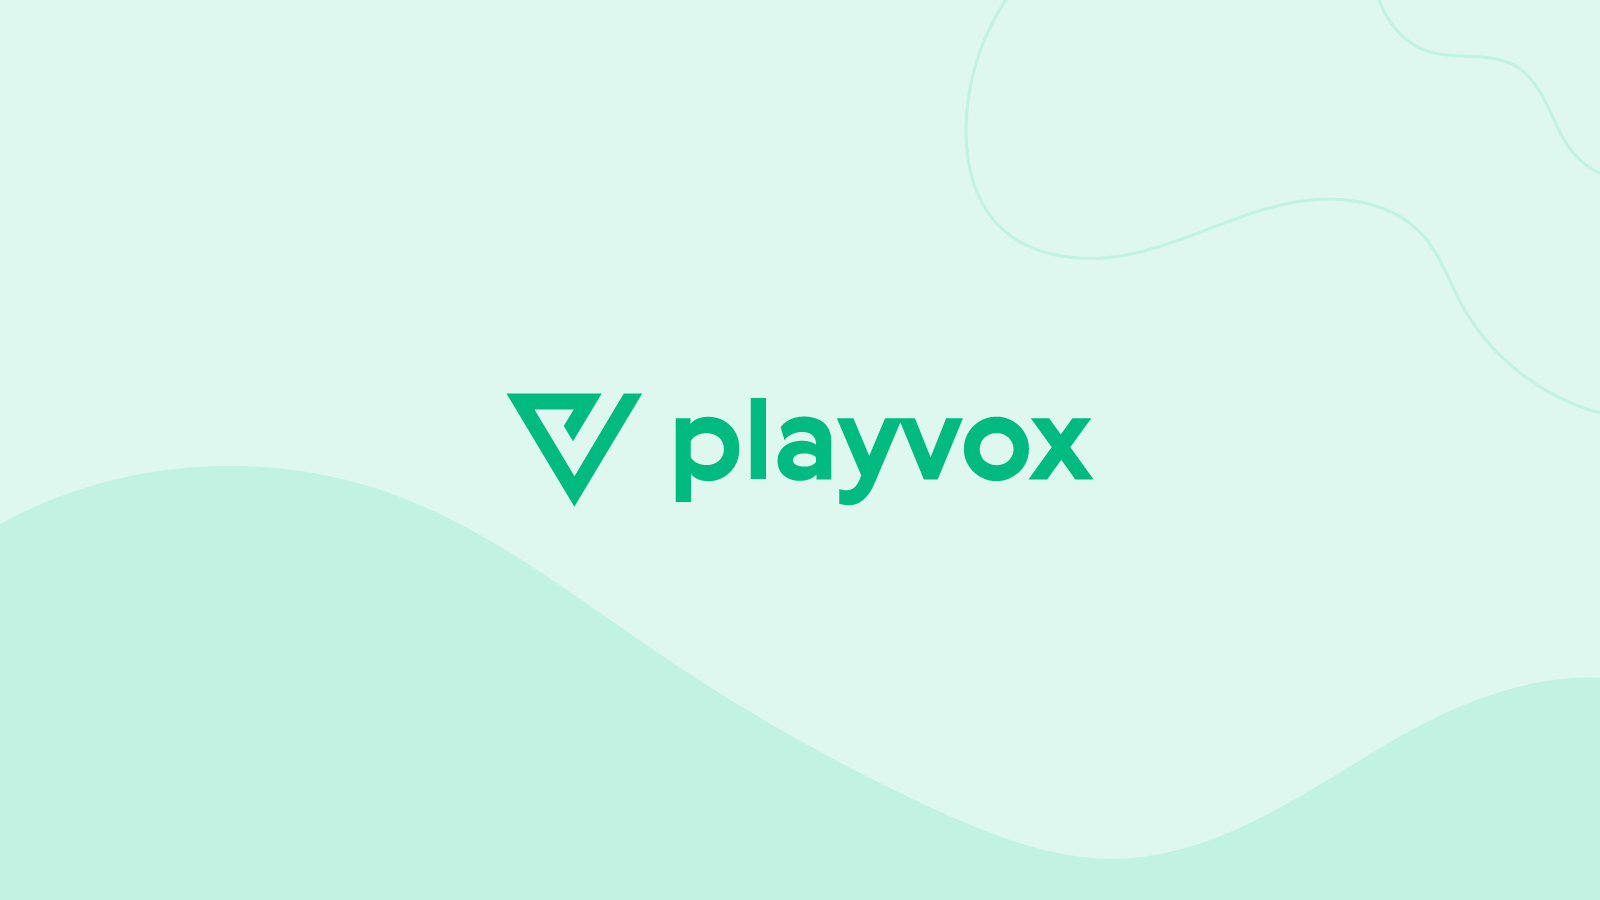 Playvox Survey: More Than Half of Agents ‘Extremely’ or ‘Very Likely’ to Leave a Job Without a Remote Work Option